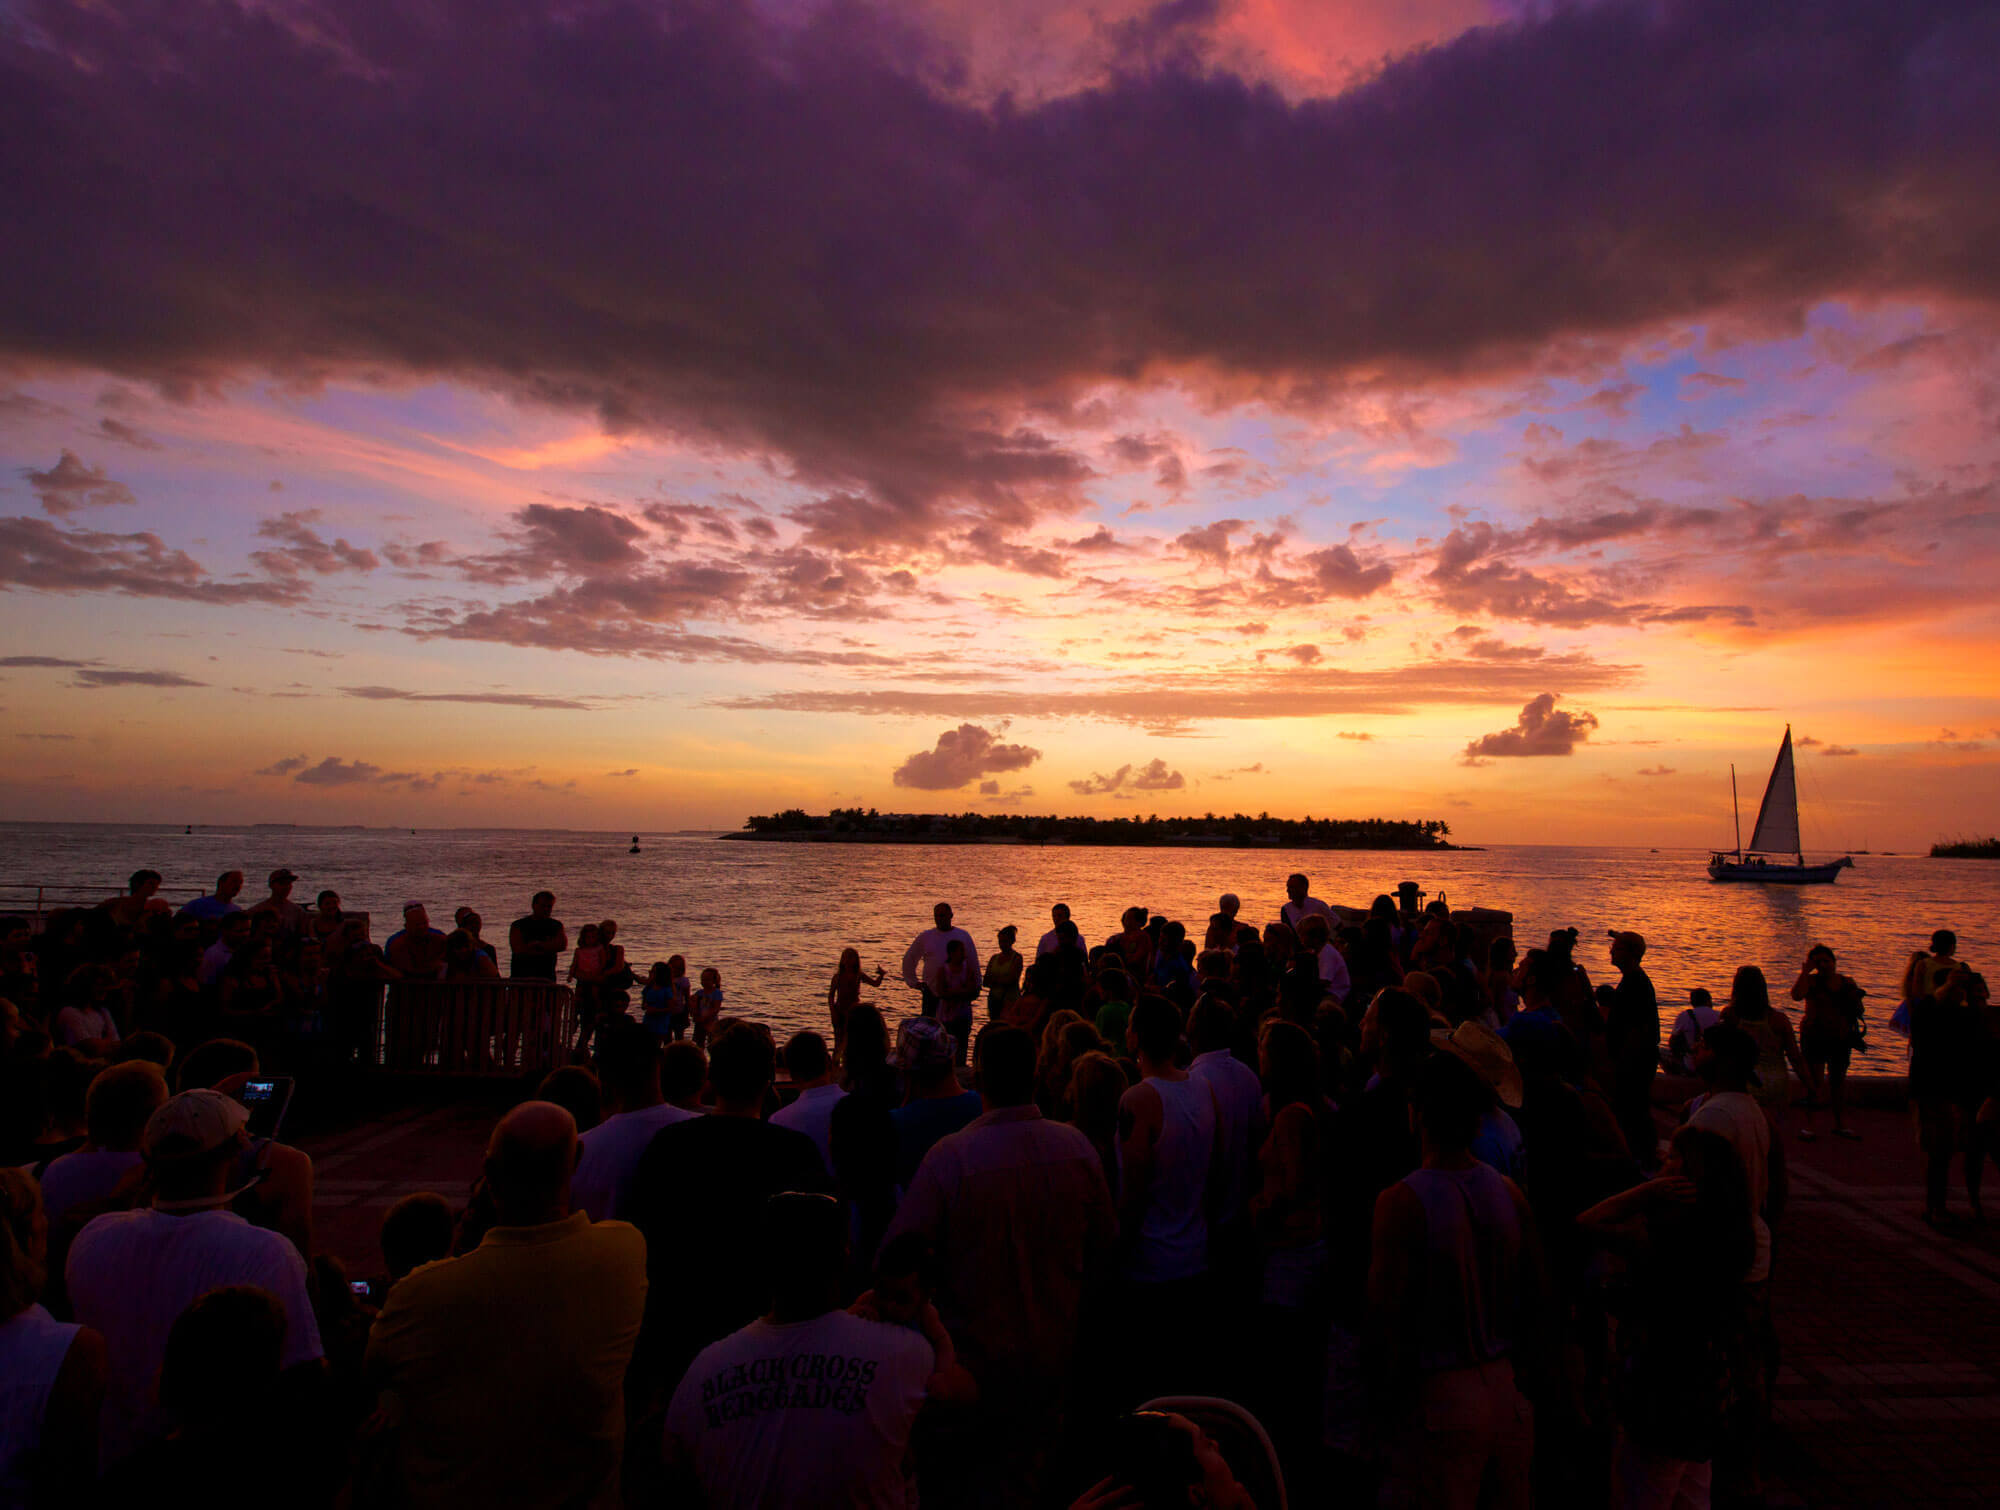 Large gathering of people on the pier in Mallory Square watching the sun set in Key West, FL